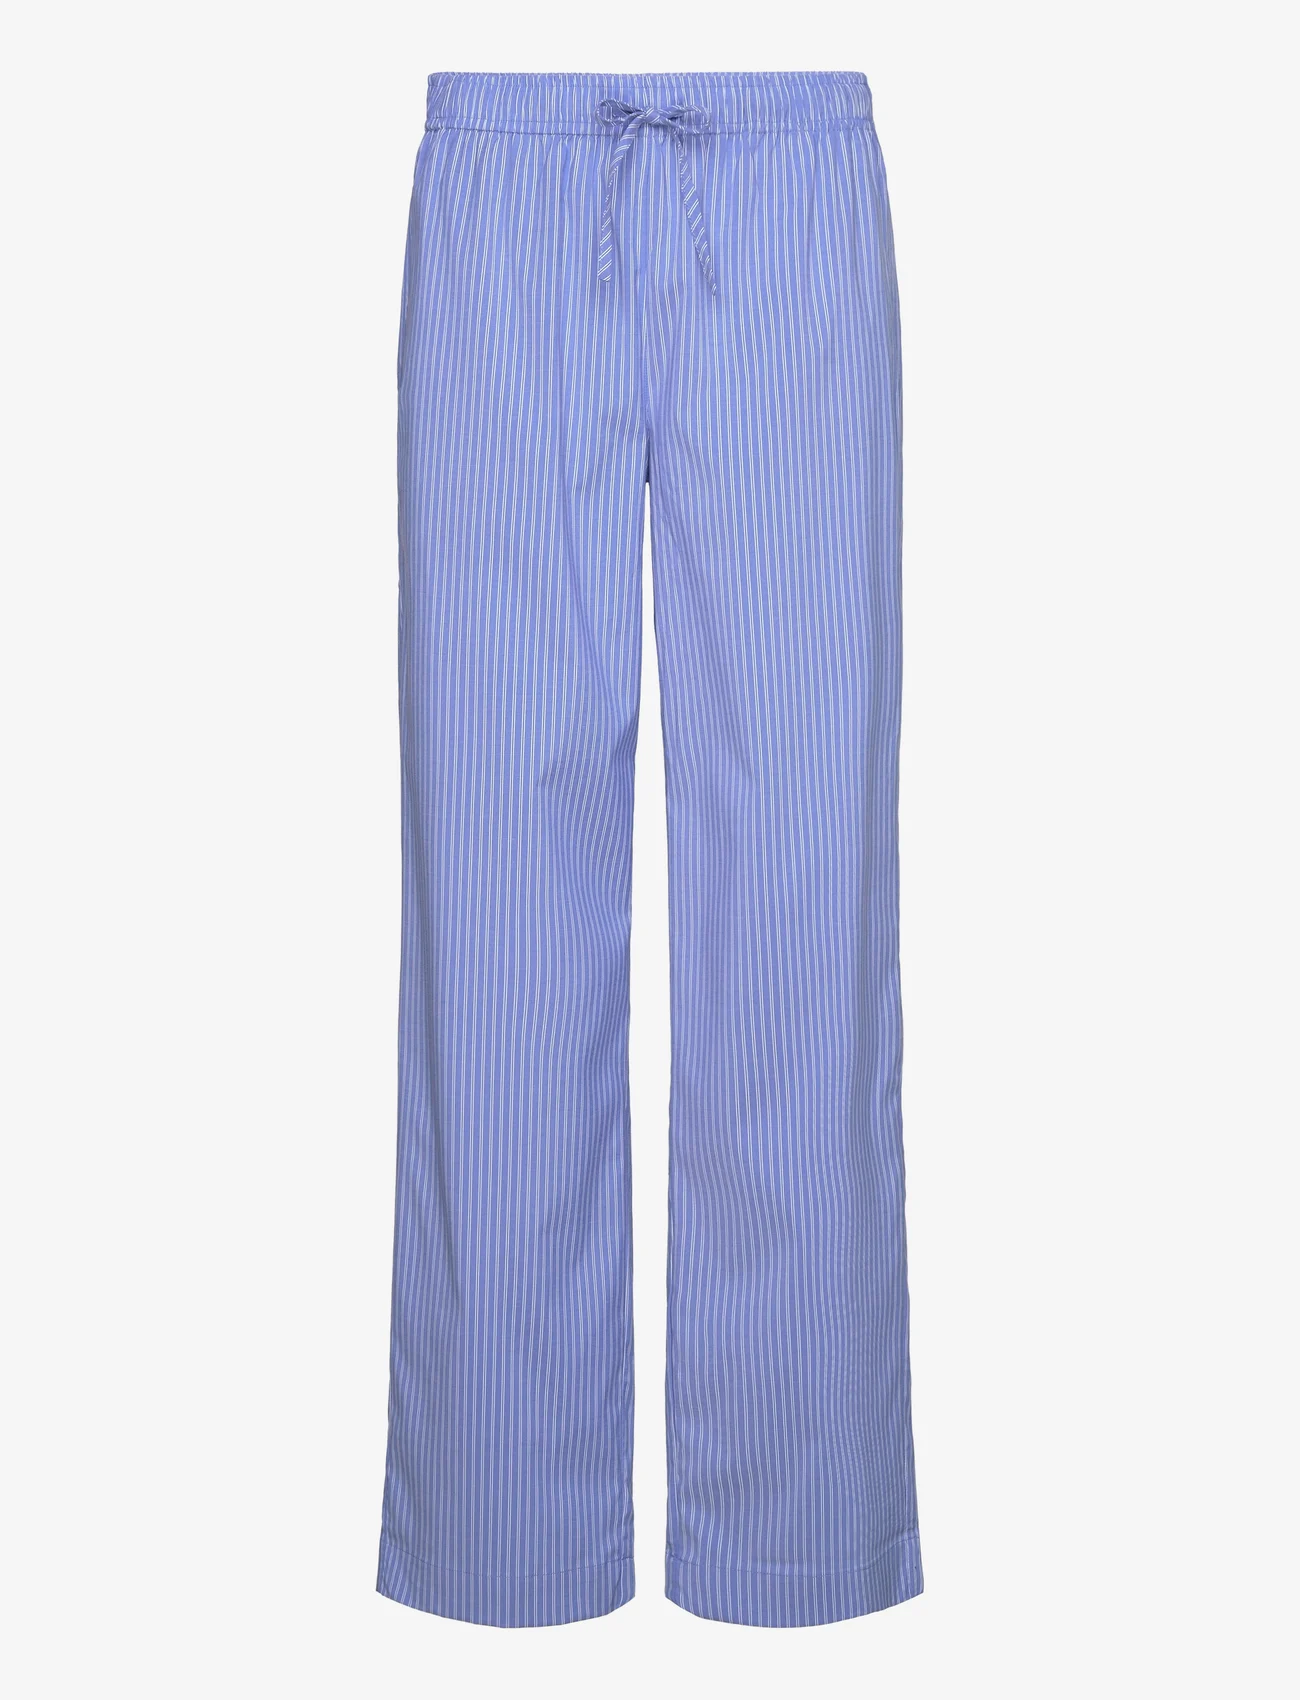 Sofie Schnoor - Trousers - blue striped - 0